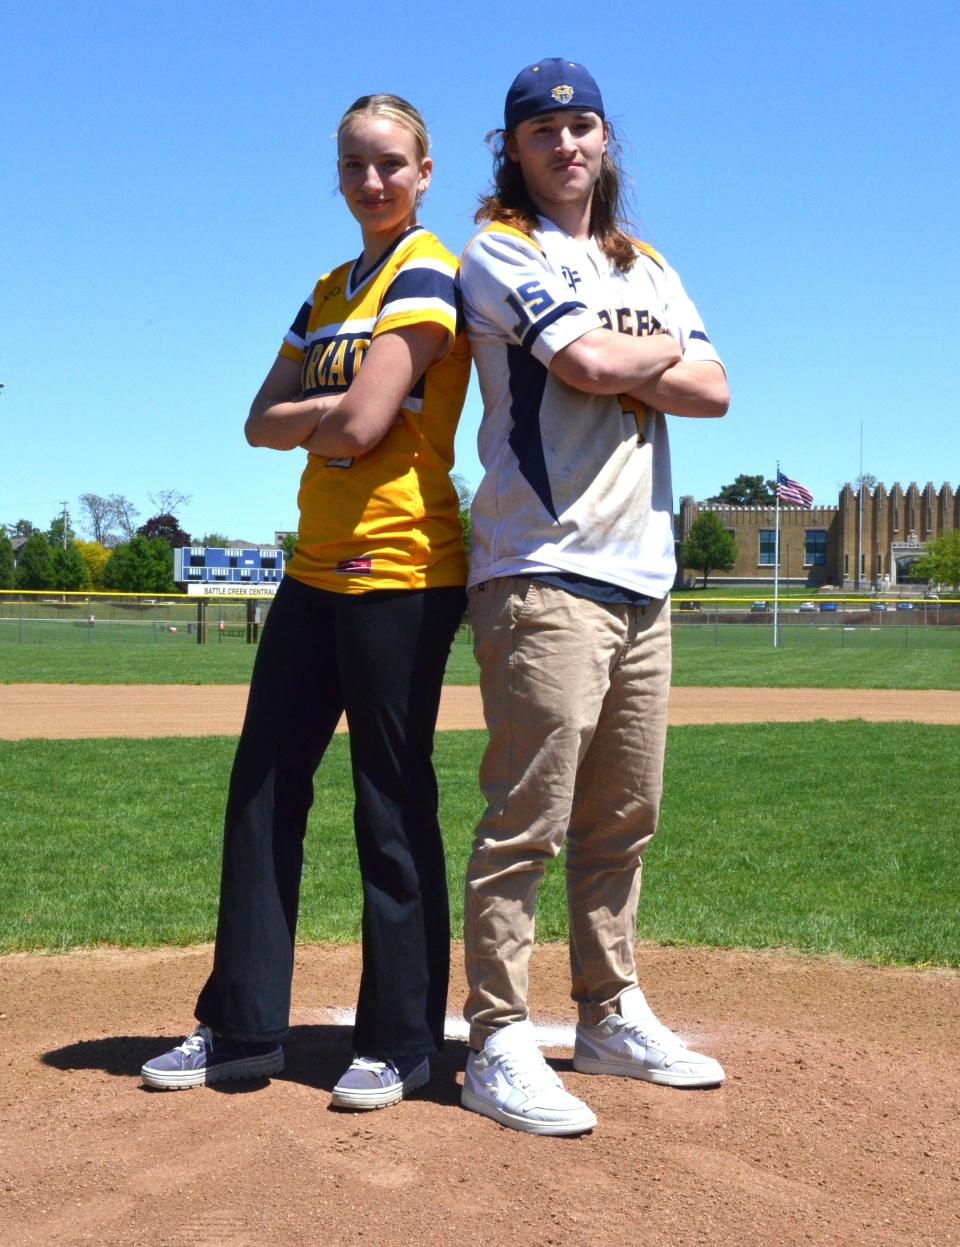 Kaylynn Jones, left, and Caleb Jones are twins and seniors at Battle Creek Central. Kaylynn is the No. 1 pitcher for the Bearcat softball team. Caleb is the leading pitcher and starting outfielder for the Bearcat baseball team.